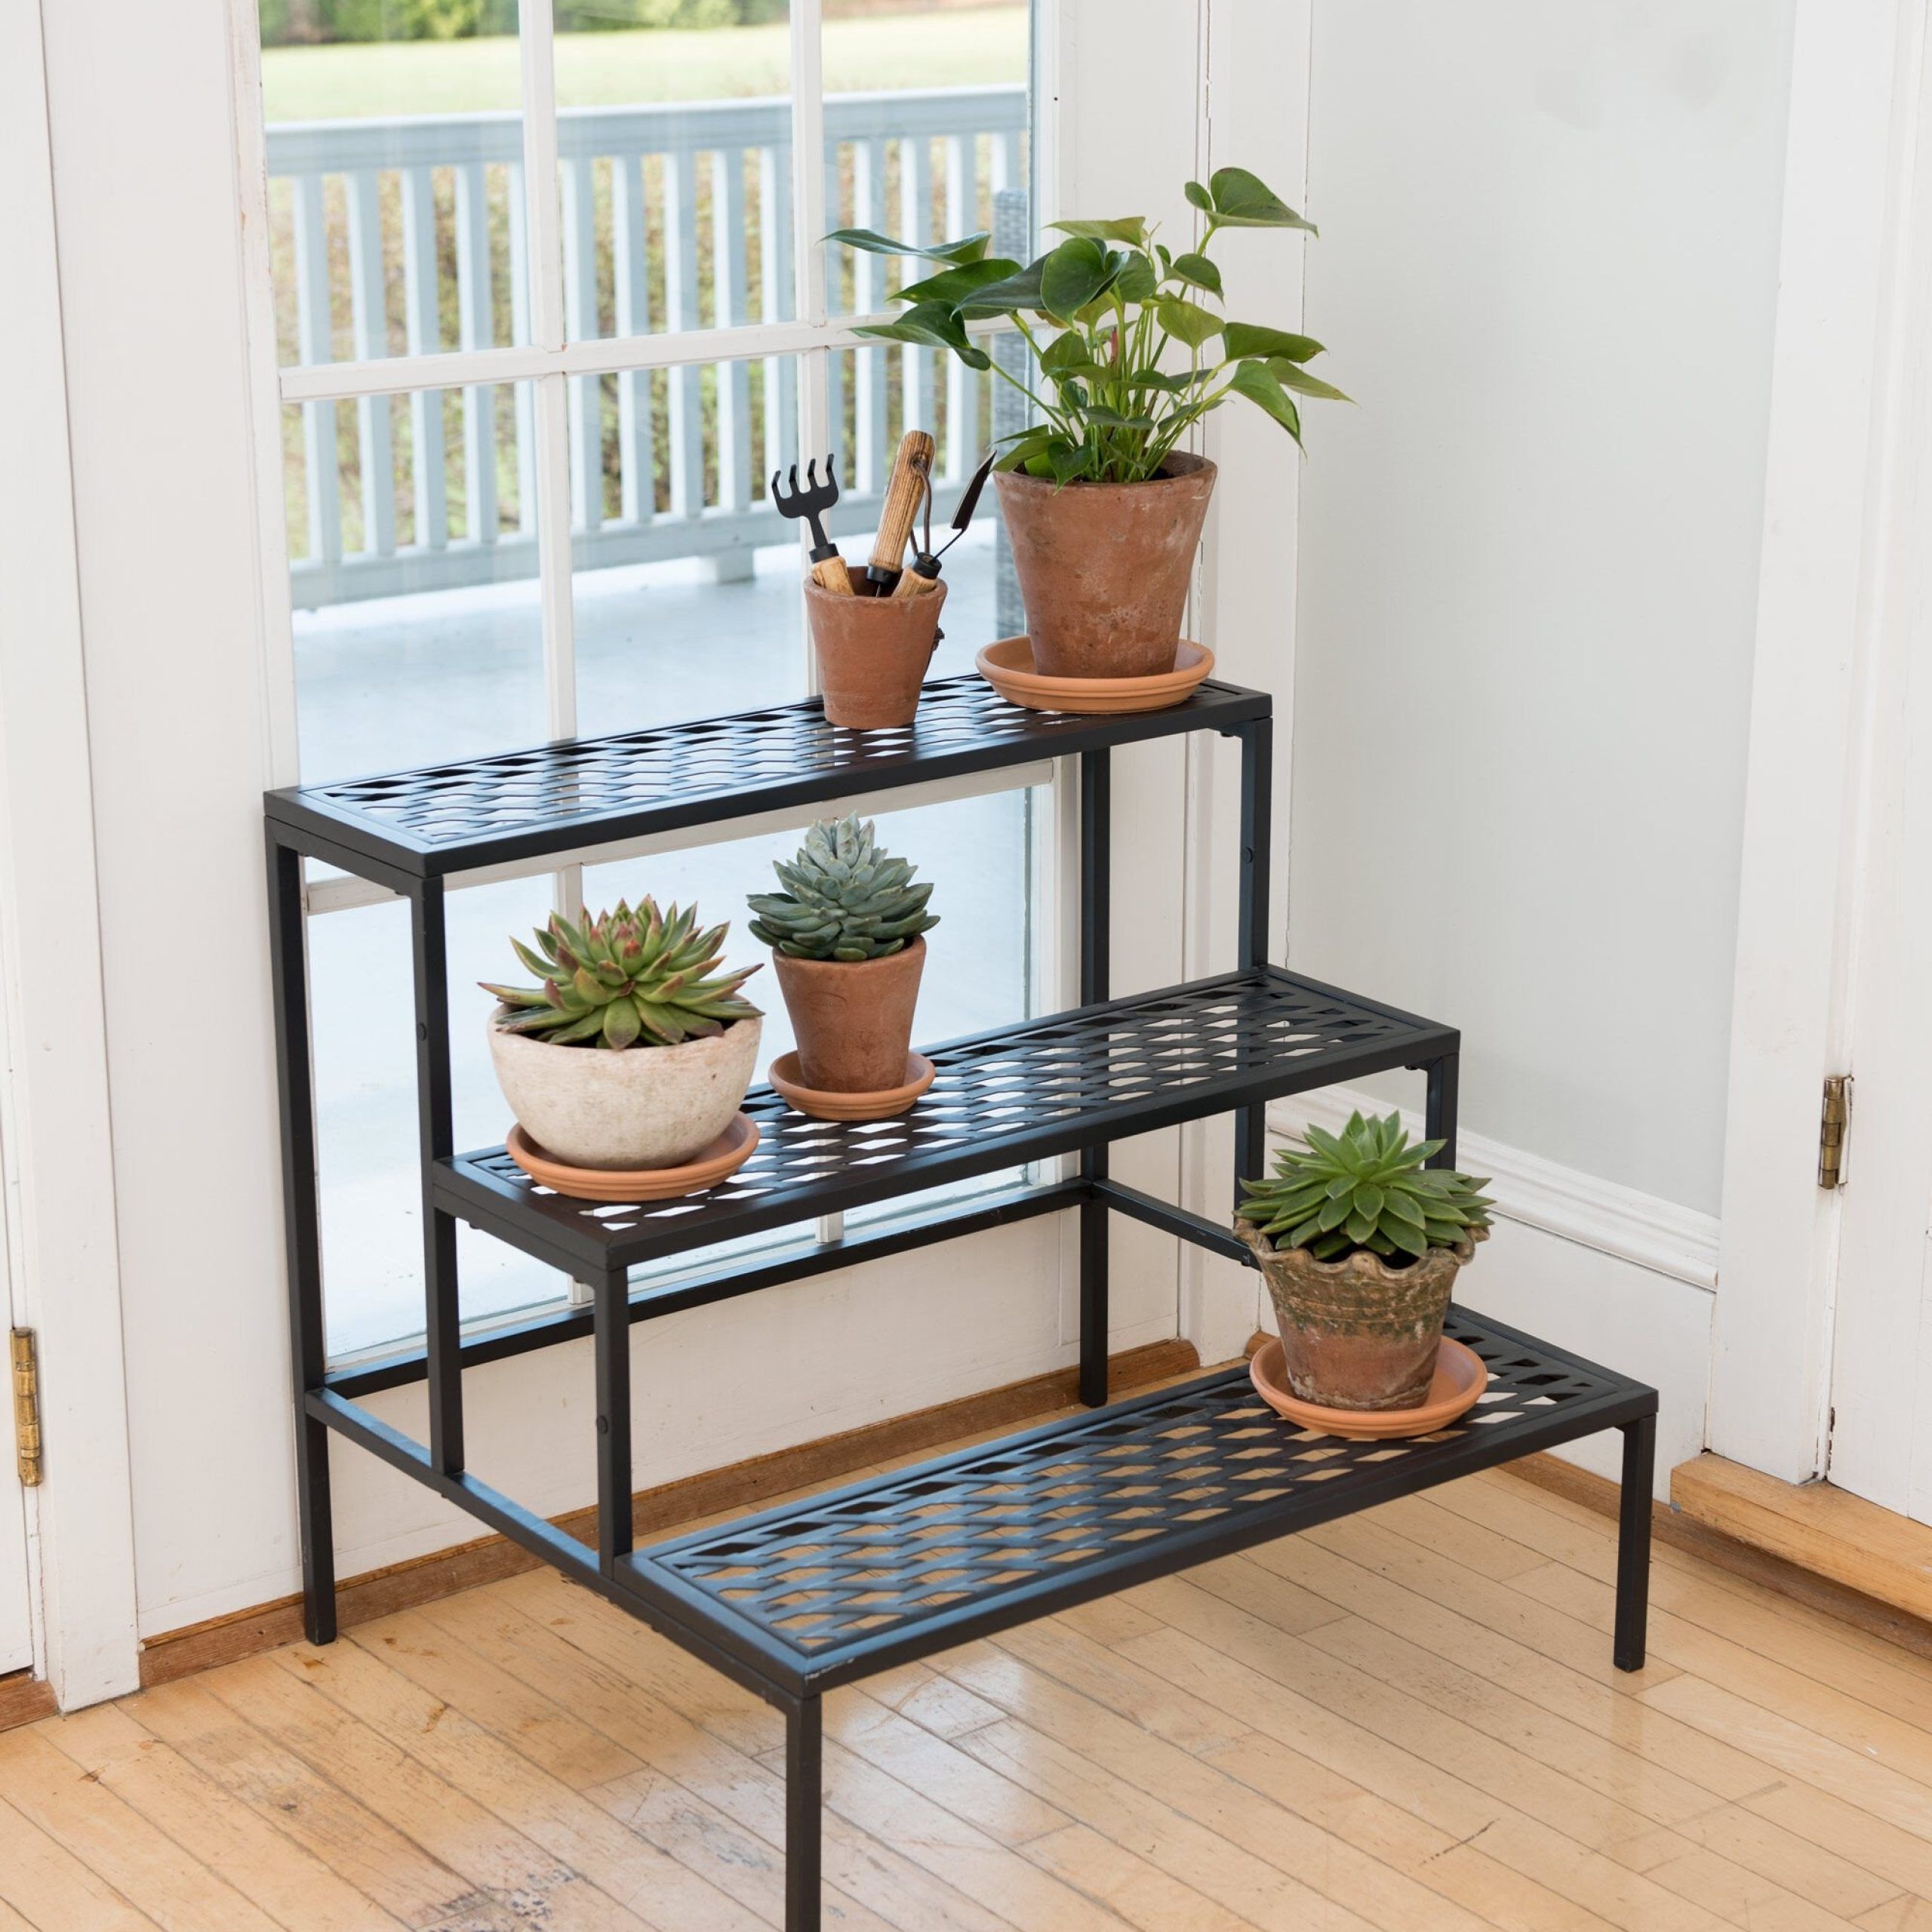 Lattice Multi Tiered Plant Stand – Black | Gardener's Supply With Regard To Three Tiered Plant Stands (View 4 of 15)